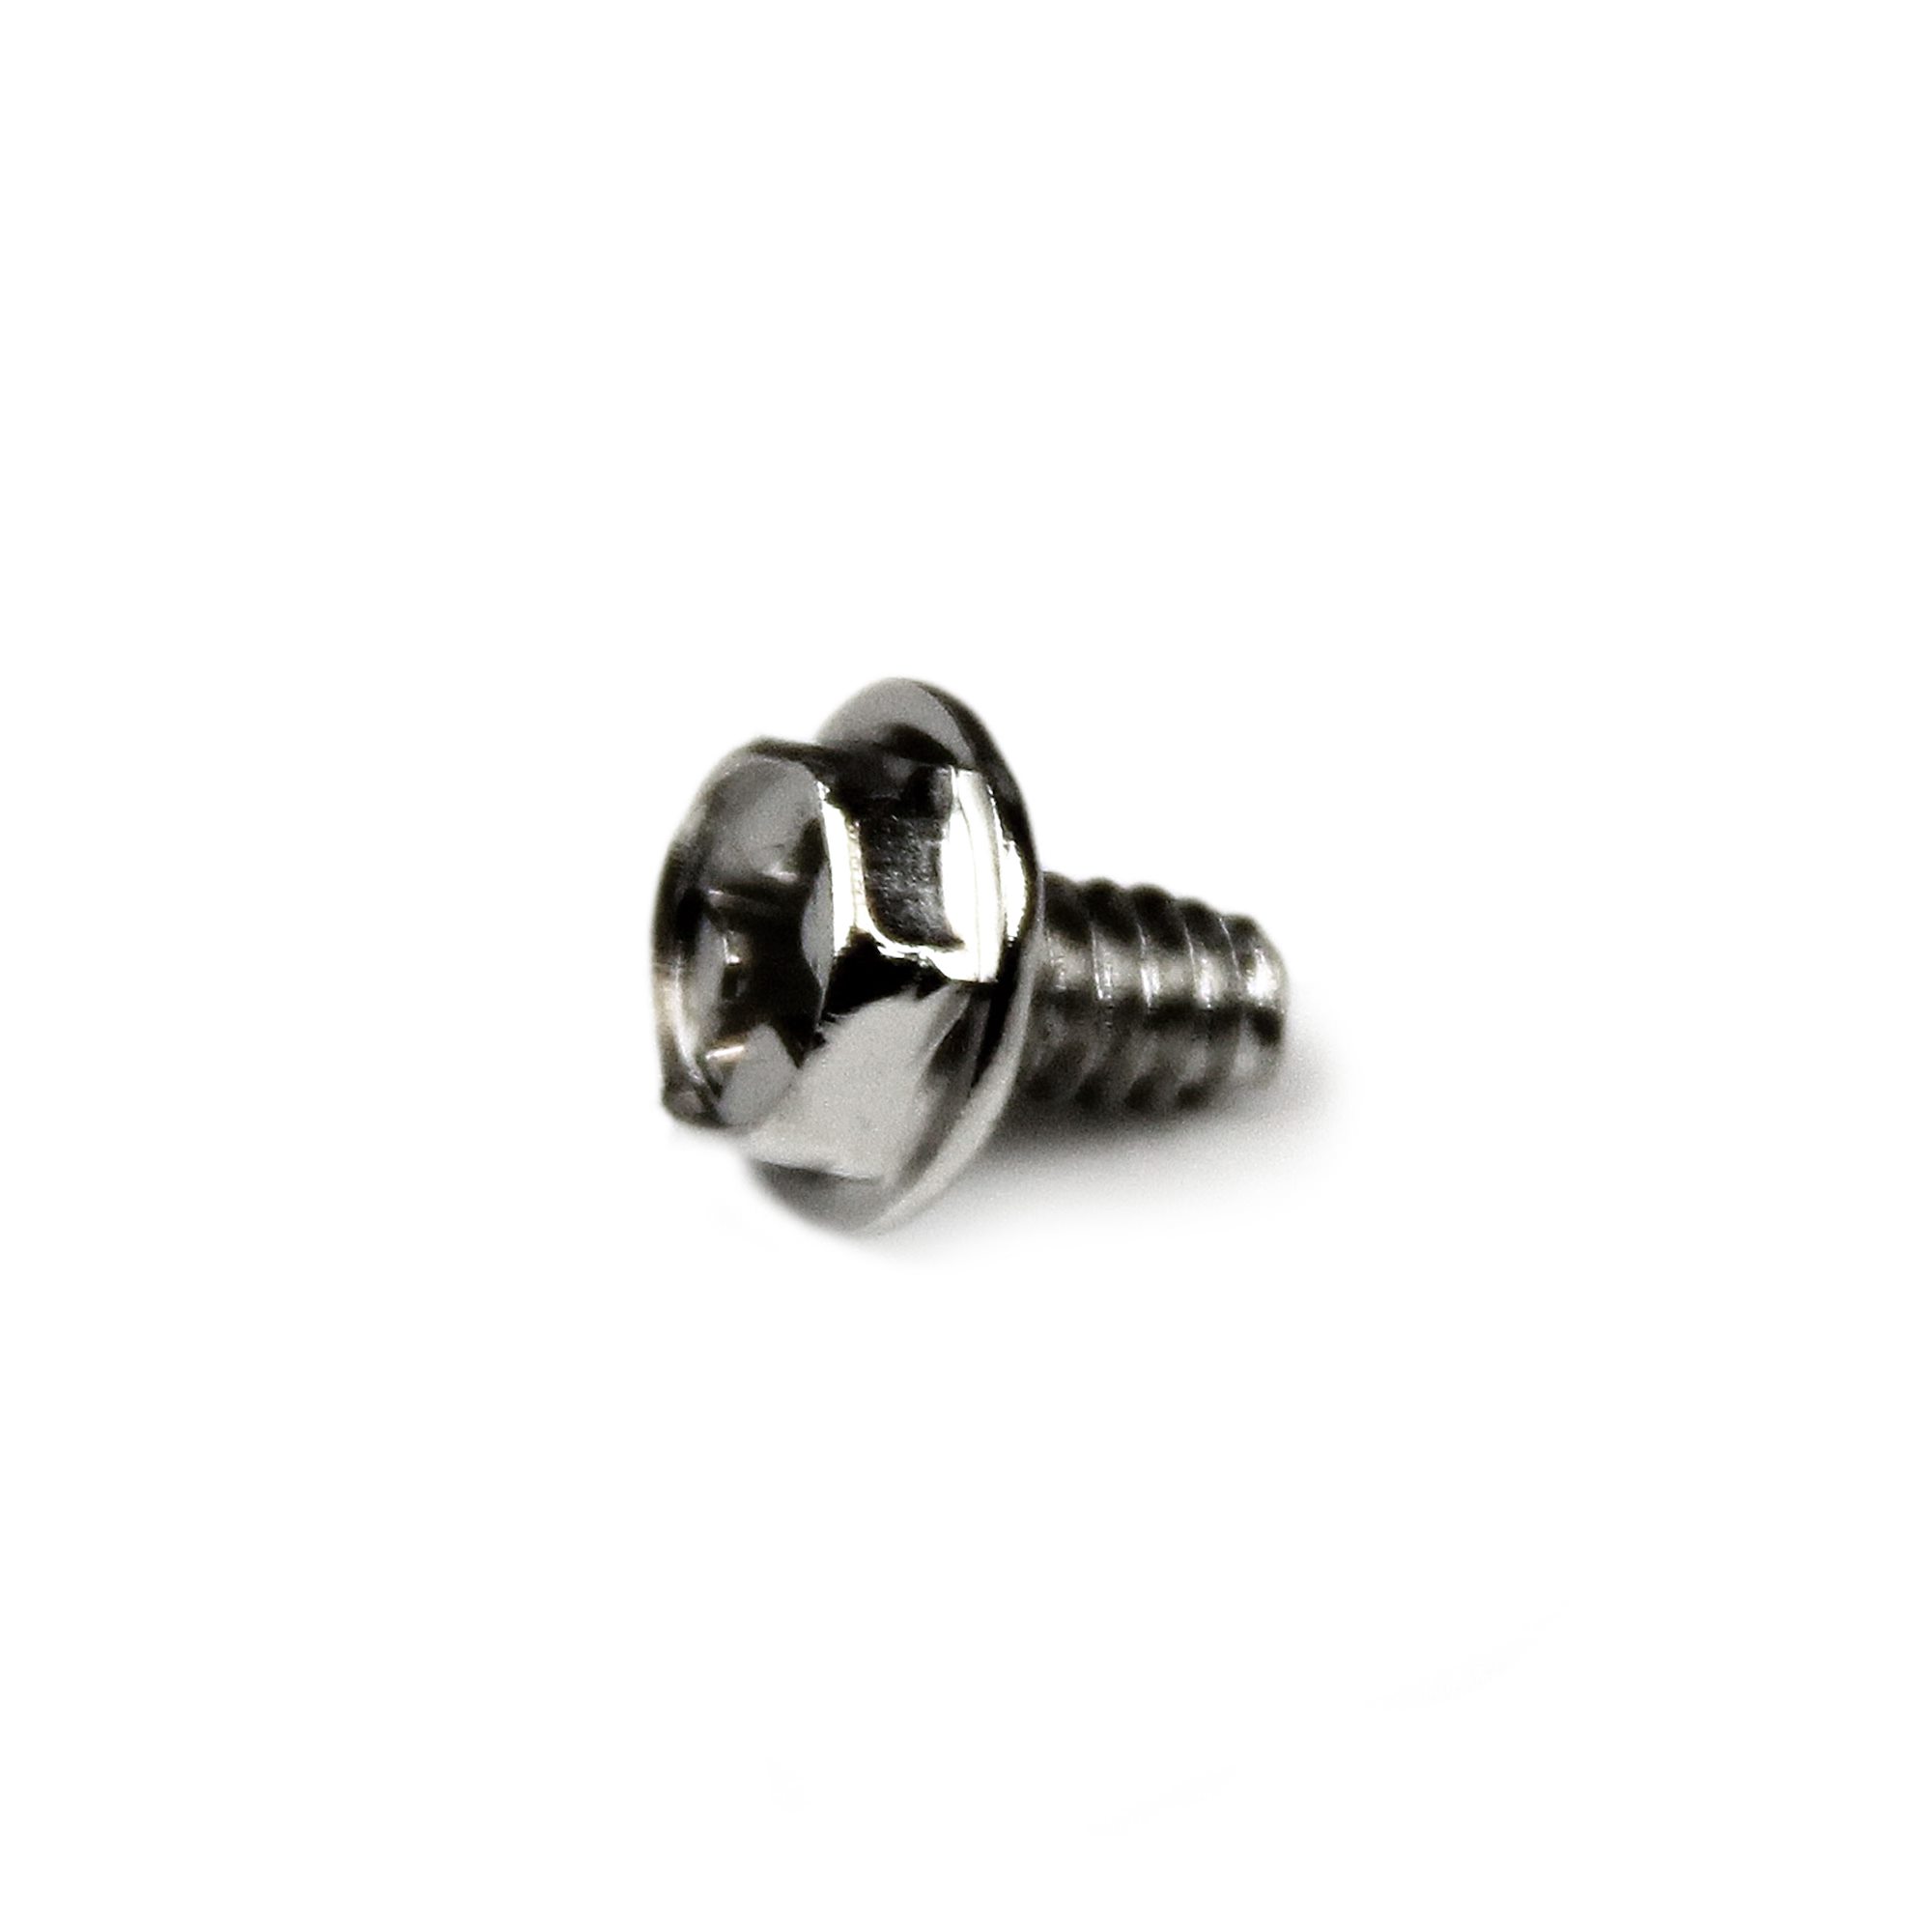 Replacement PC Mounting Screws #6-32 x 1/4in Long Standoff - 50 Pack